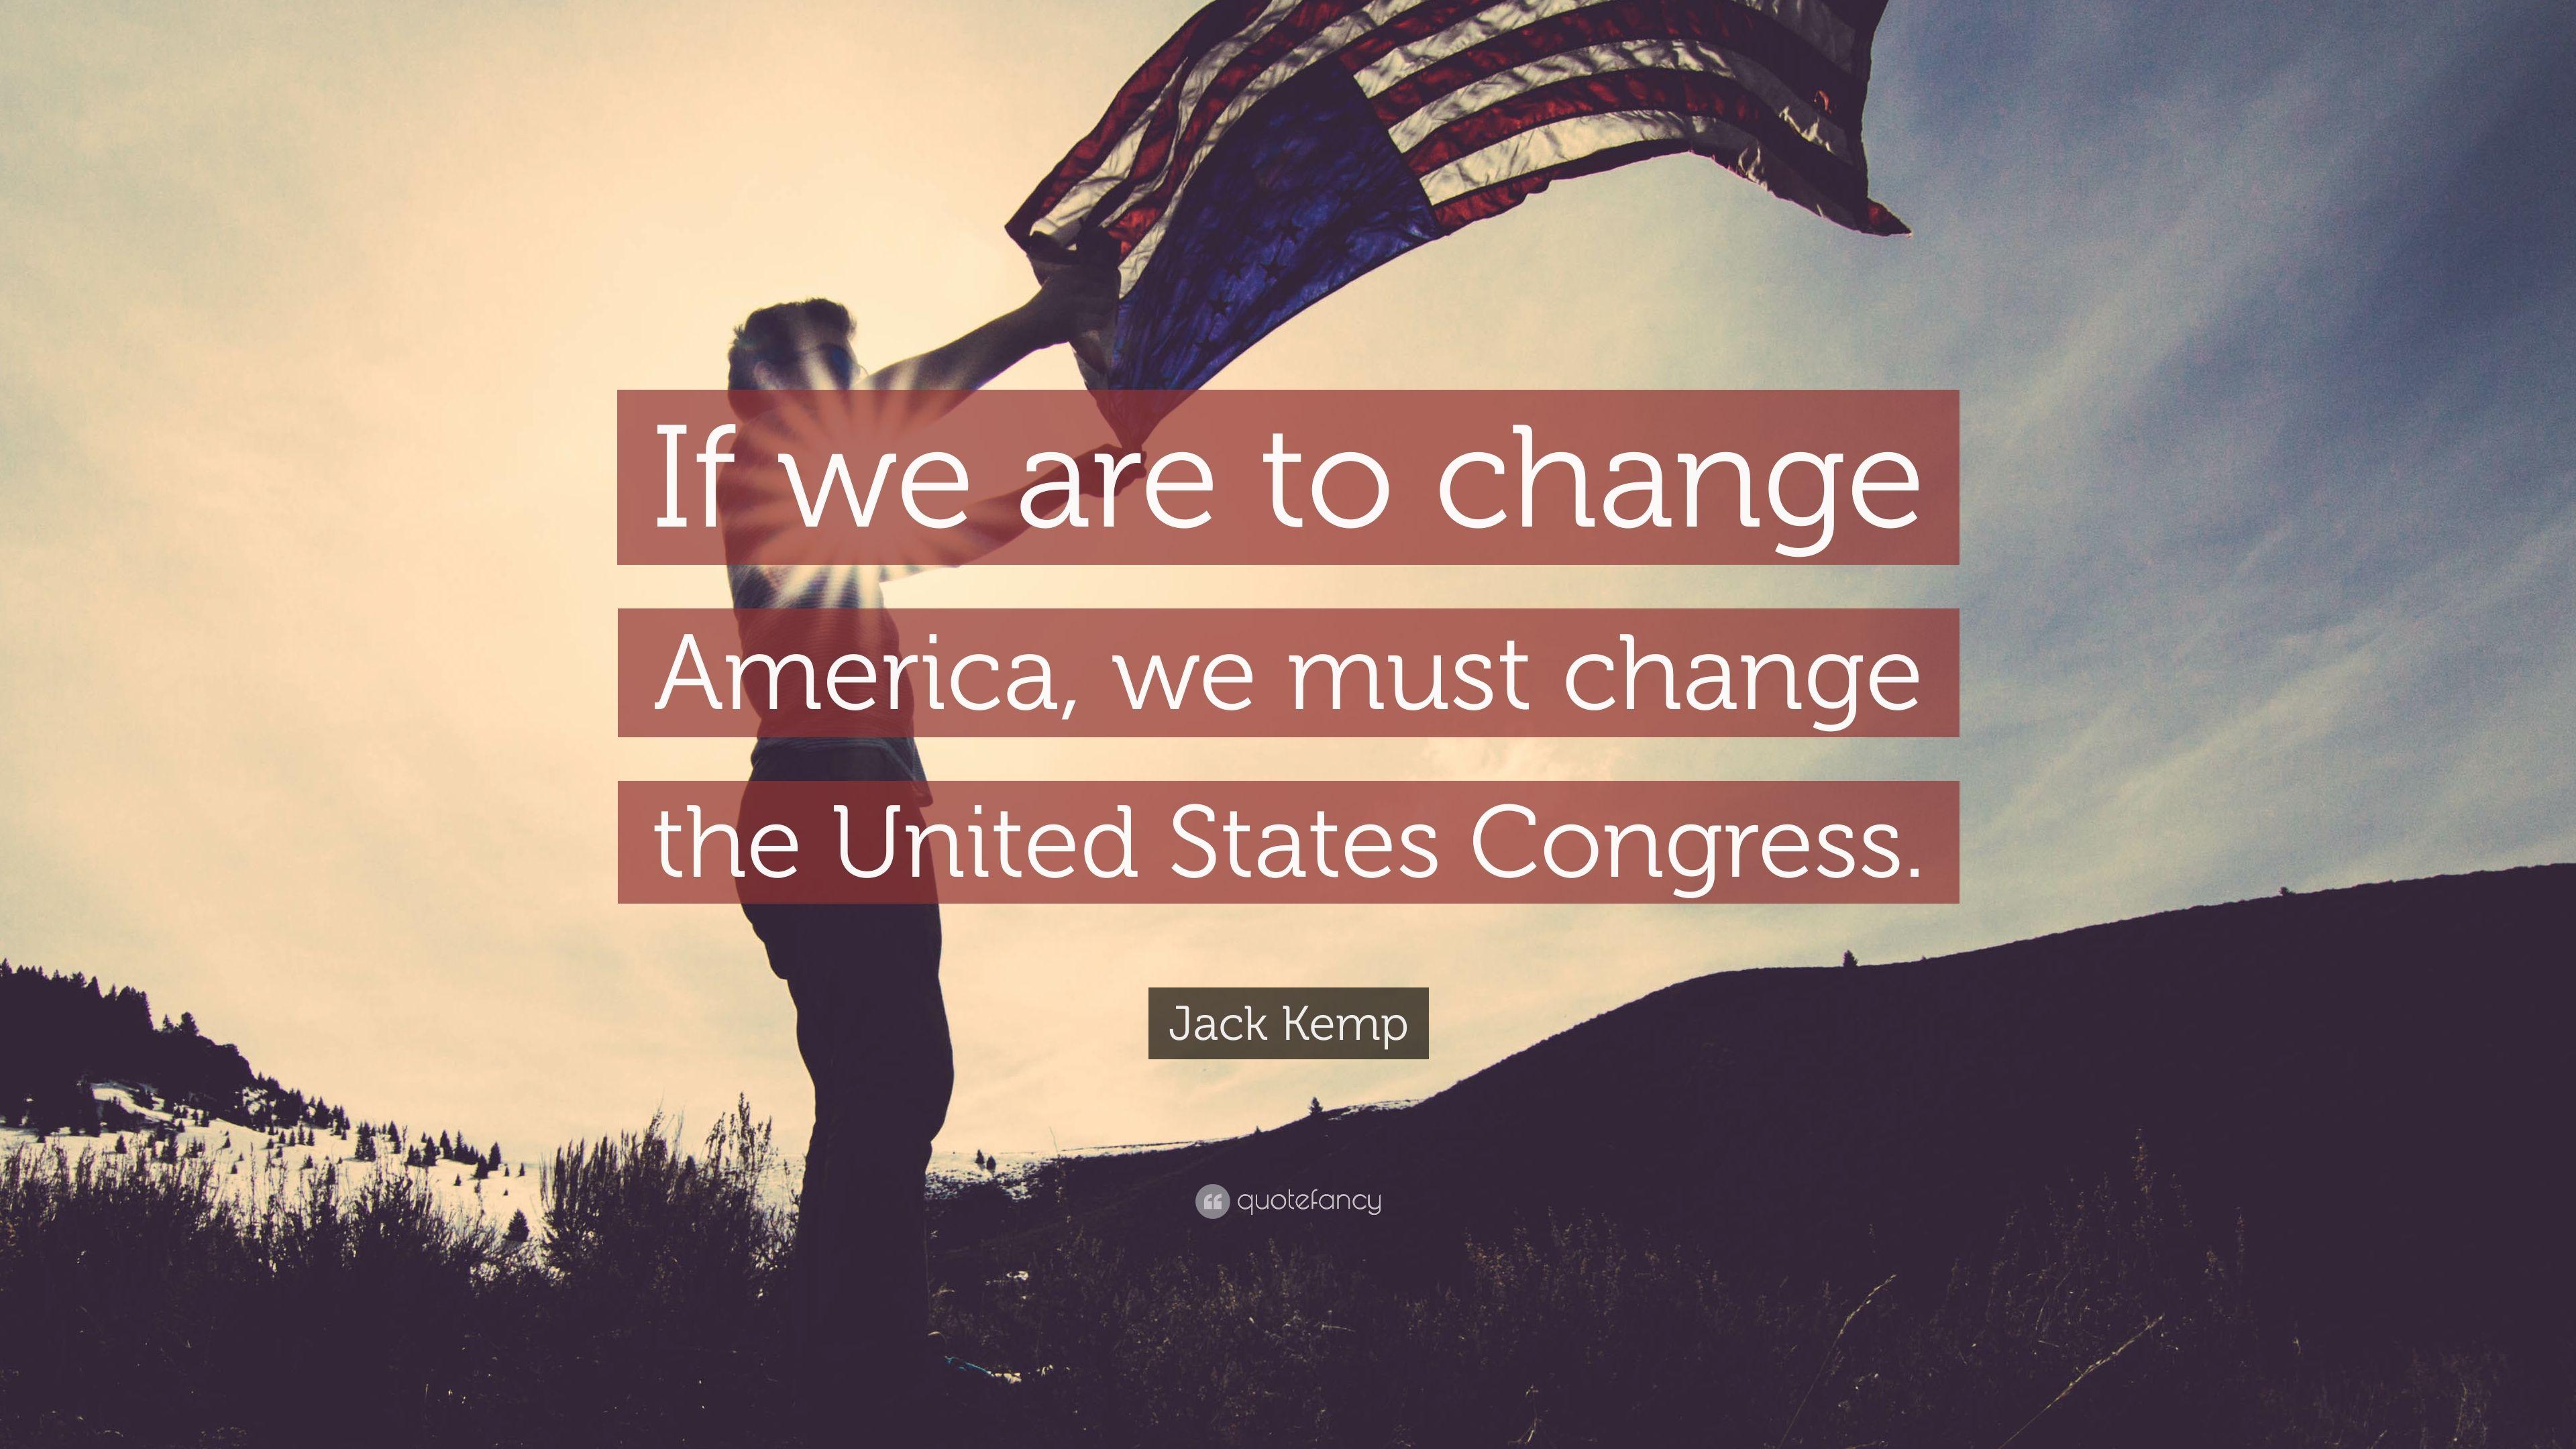 Jack Kemp Quote: “If we are to change America, we must change